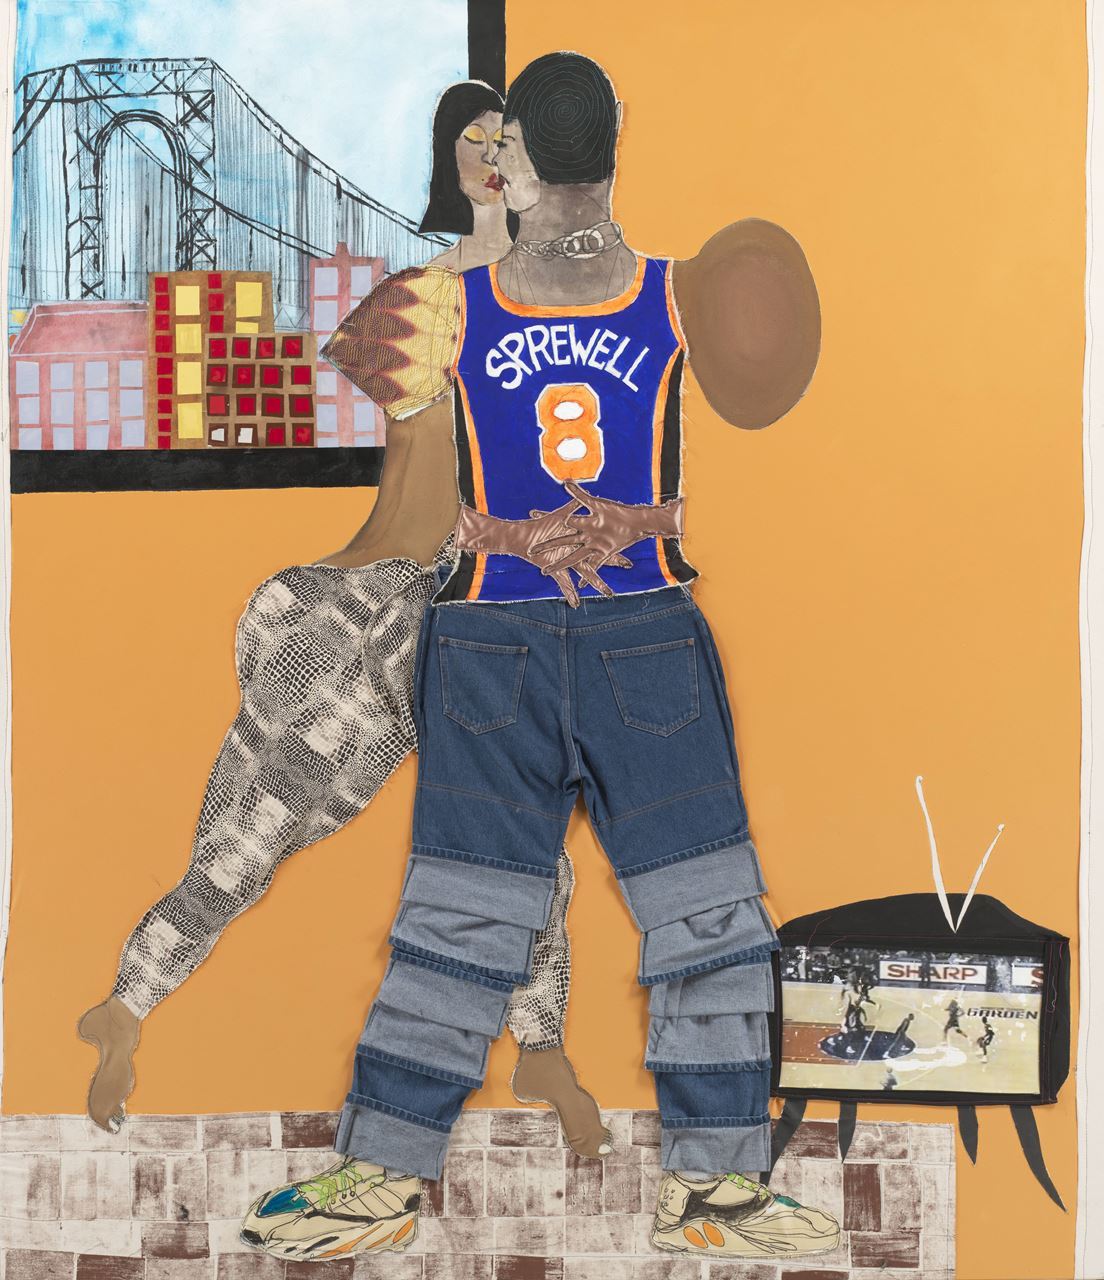 Tschabalala Self, Sprewell, 2020, fabric, thread, painted canvas, silk, jeans, painted newsprint, stamp, photographic transfer on paper, and acrylic on canvas, Solomon R. Guggenheim Museum, New York, gift, image courtesy of the artist; Pilar Corrias, London; and Galerie Eva Presenhuber, Zurich. ©Tschabalala Self